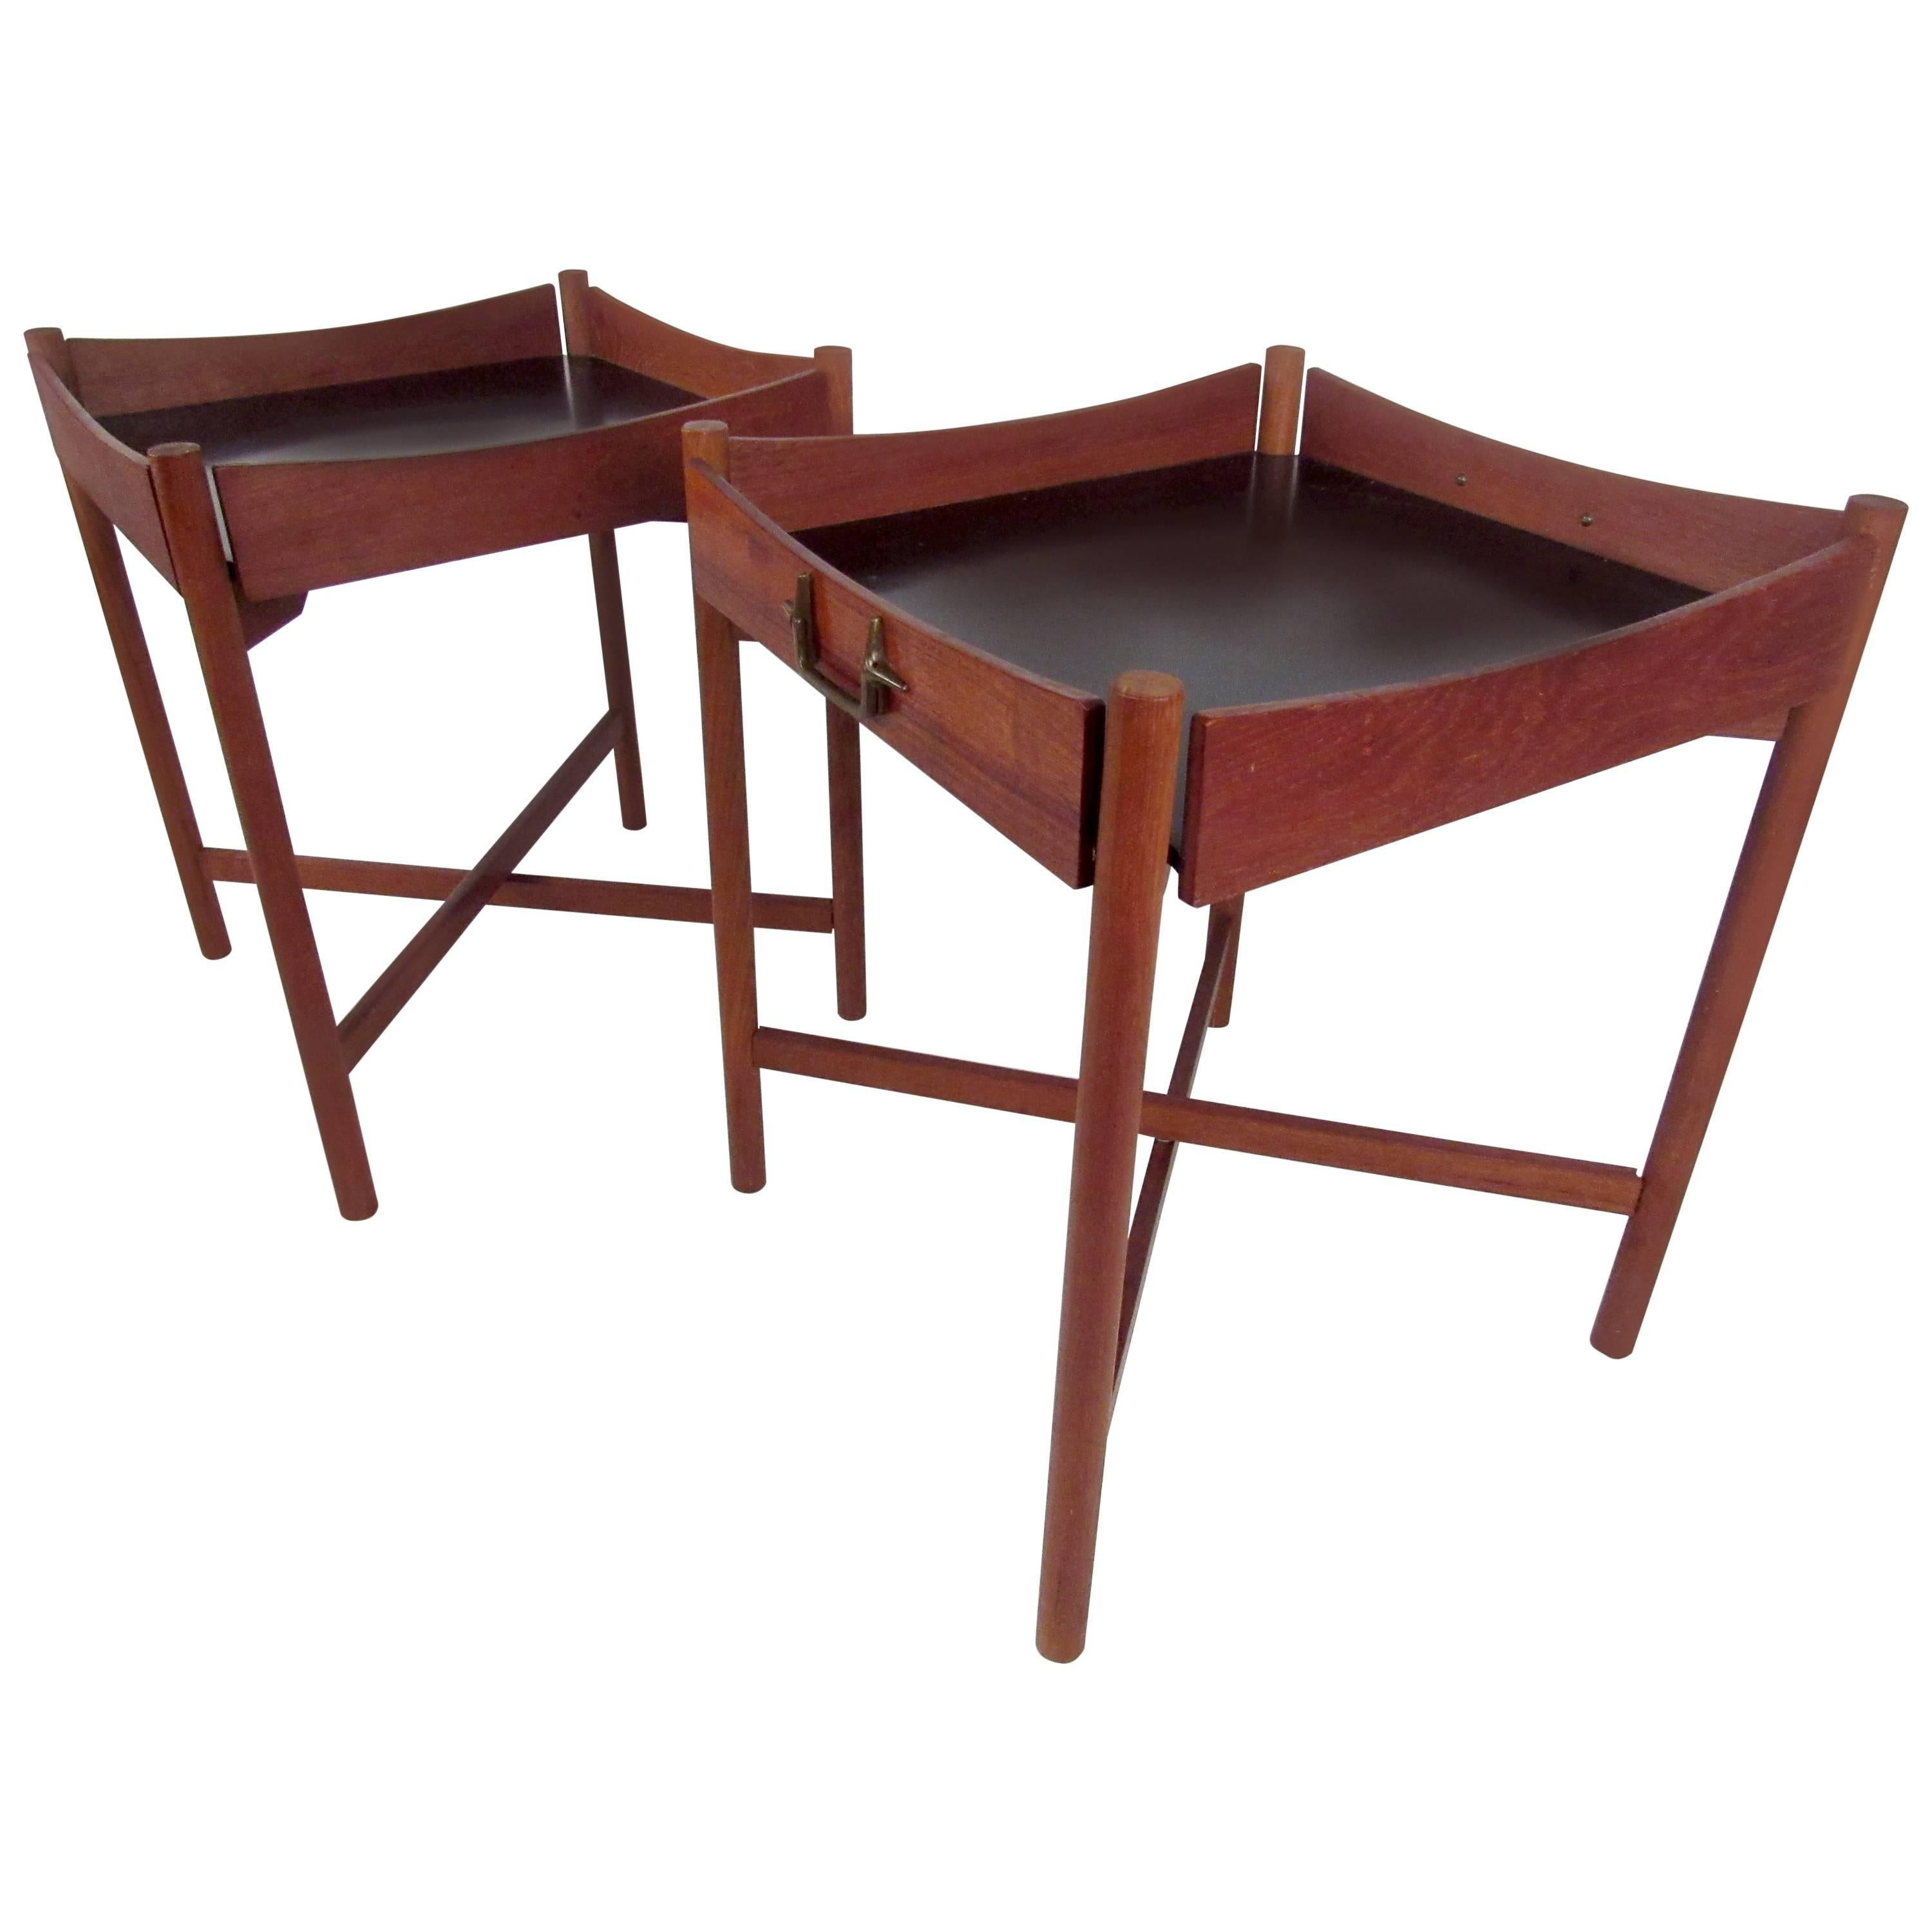 Pair of Mid-Century Collapsible Teak Tray Tables